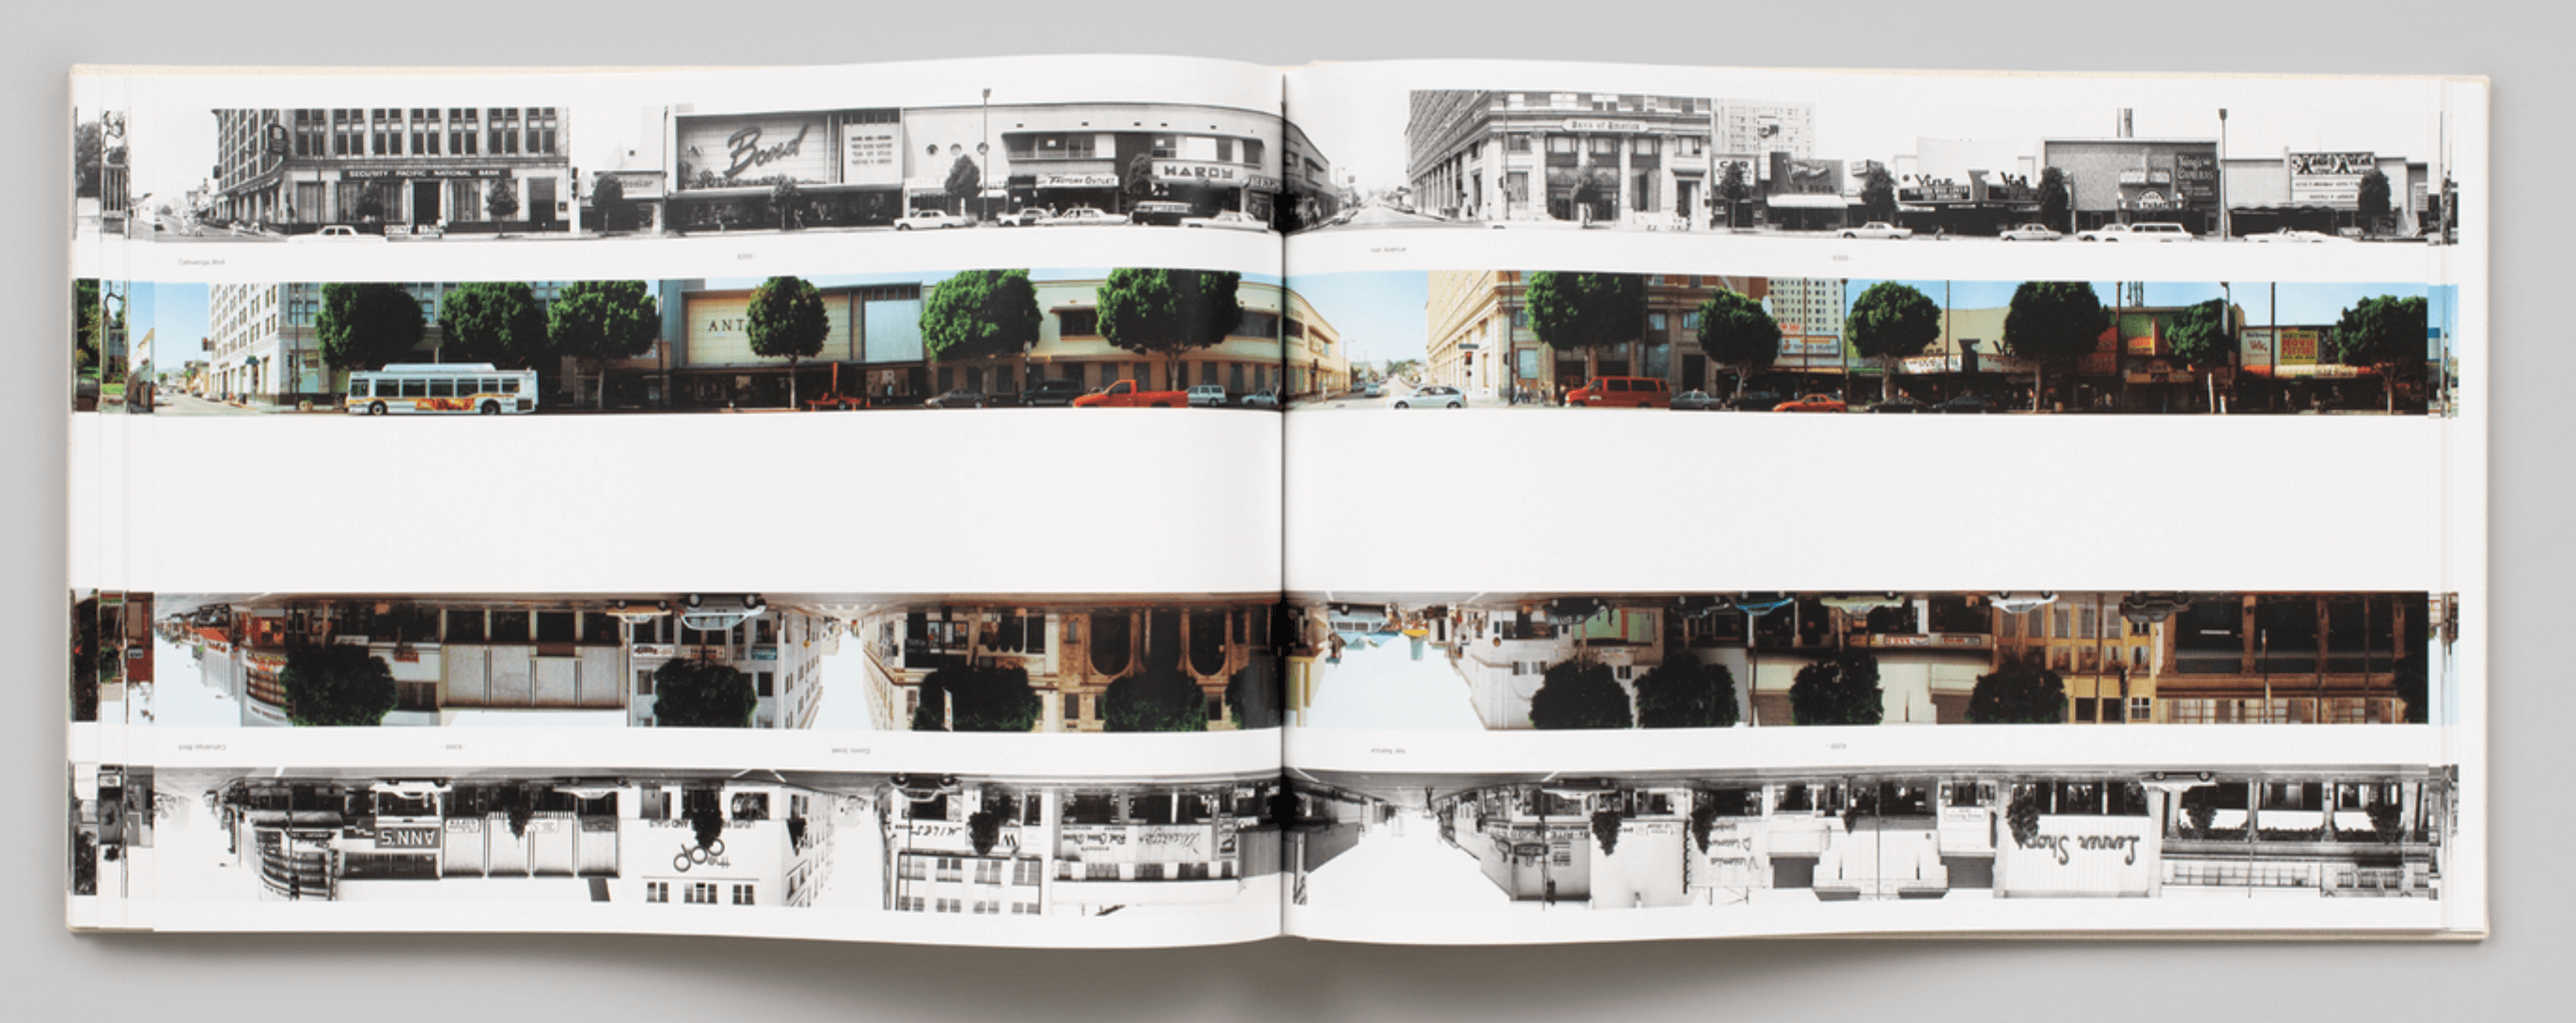 then-and-now-ed-ruschq-steidl-verlag-3